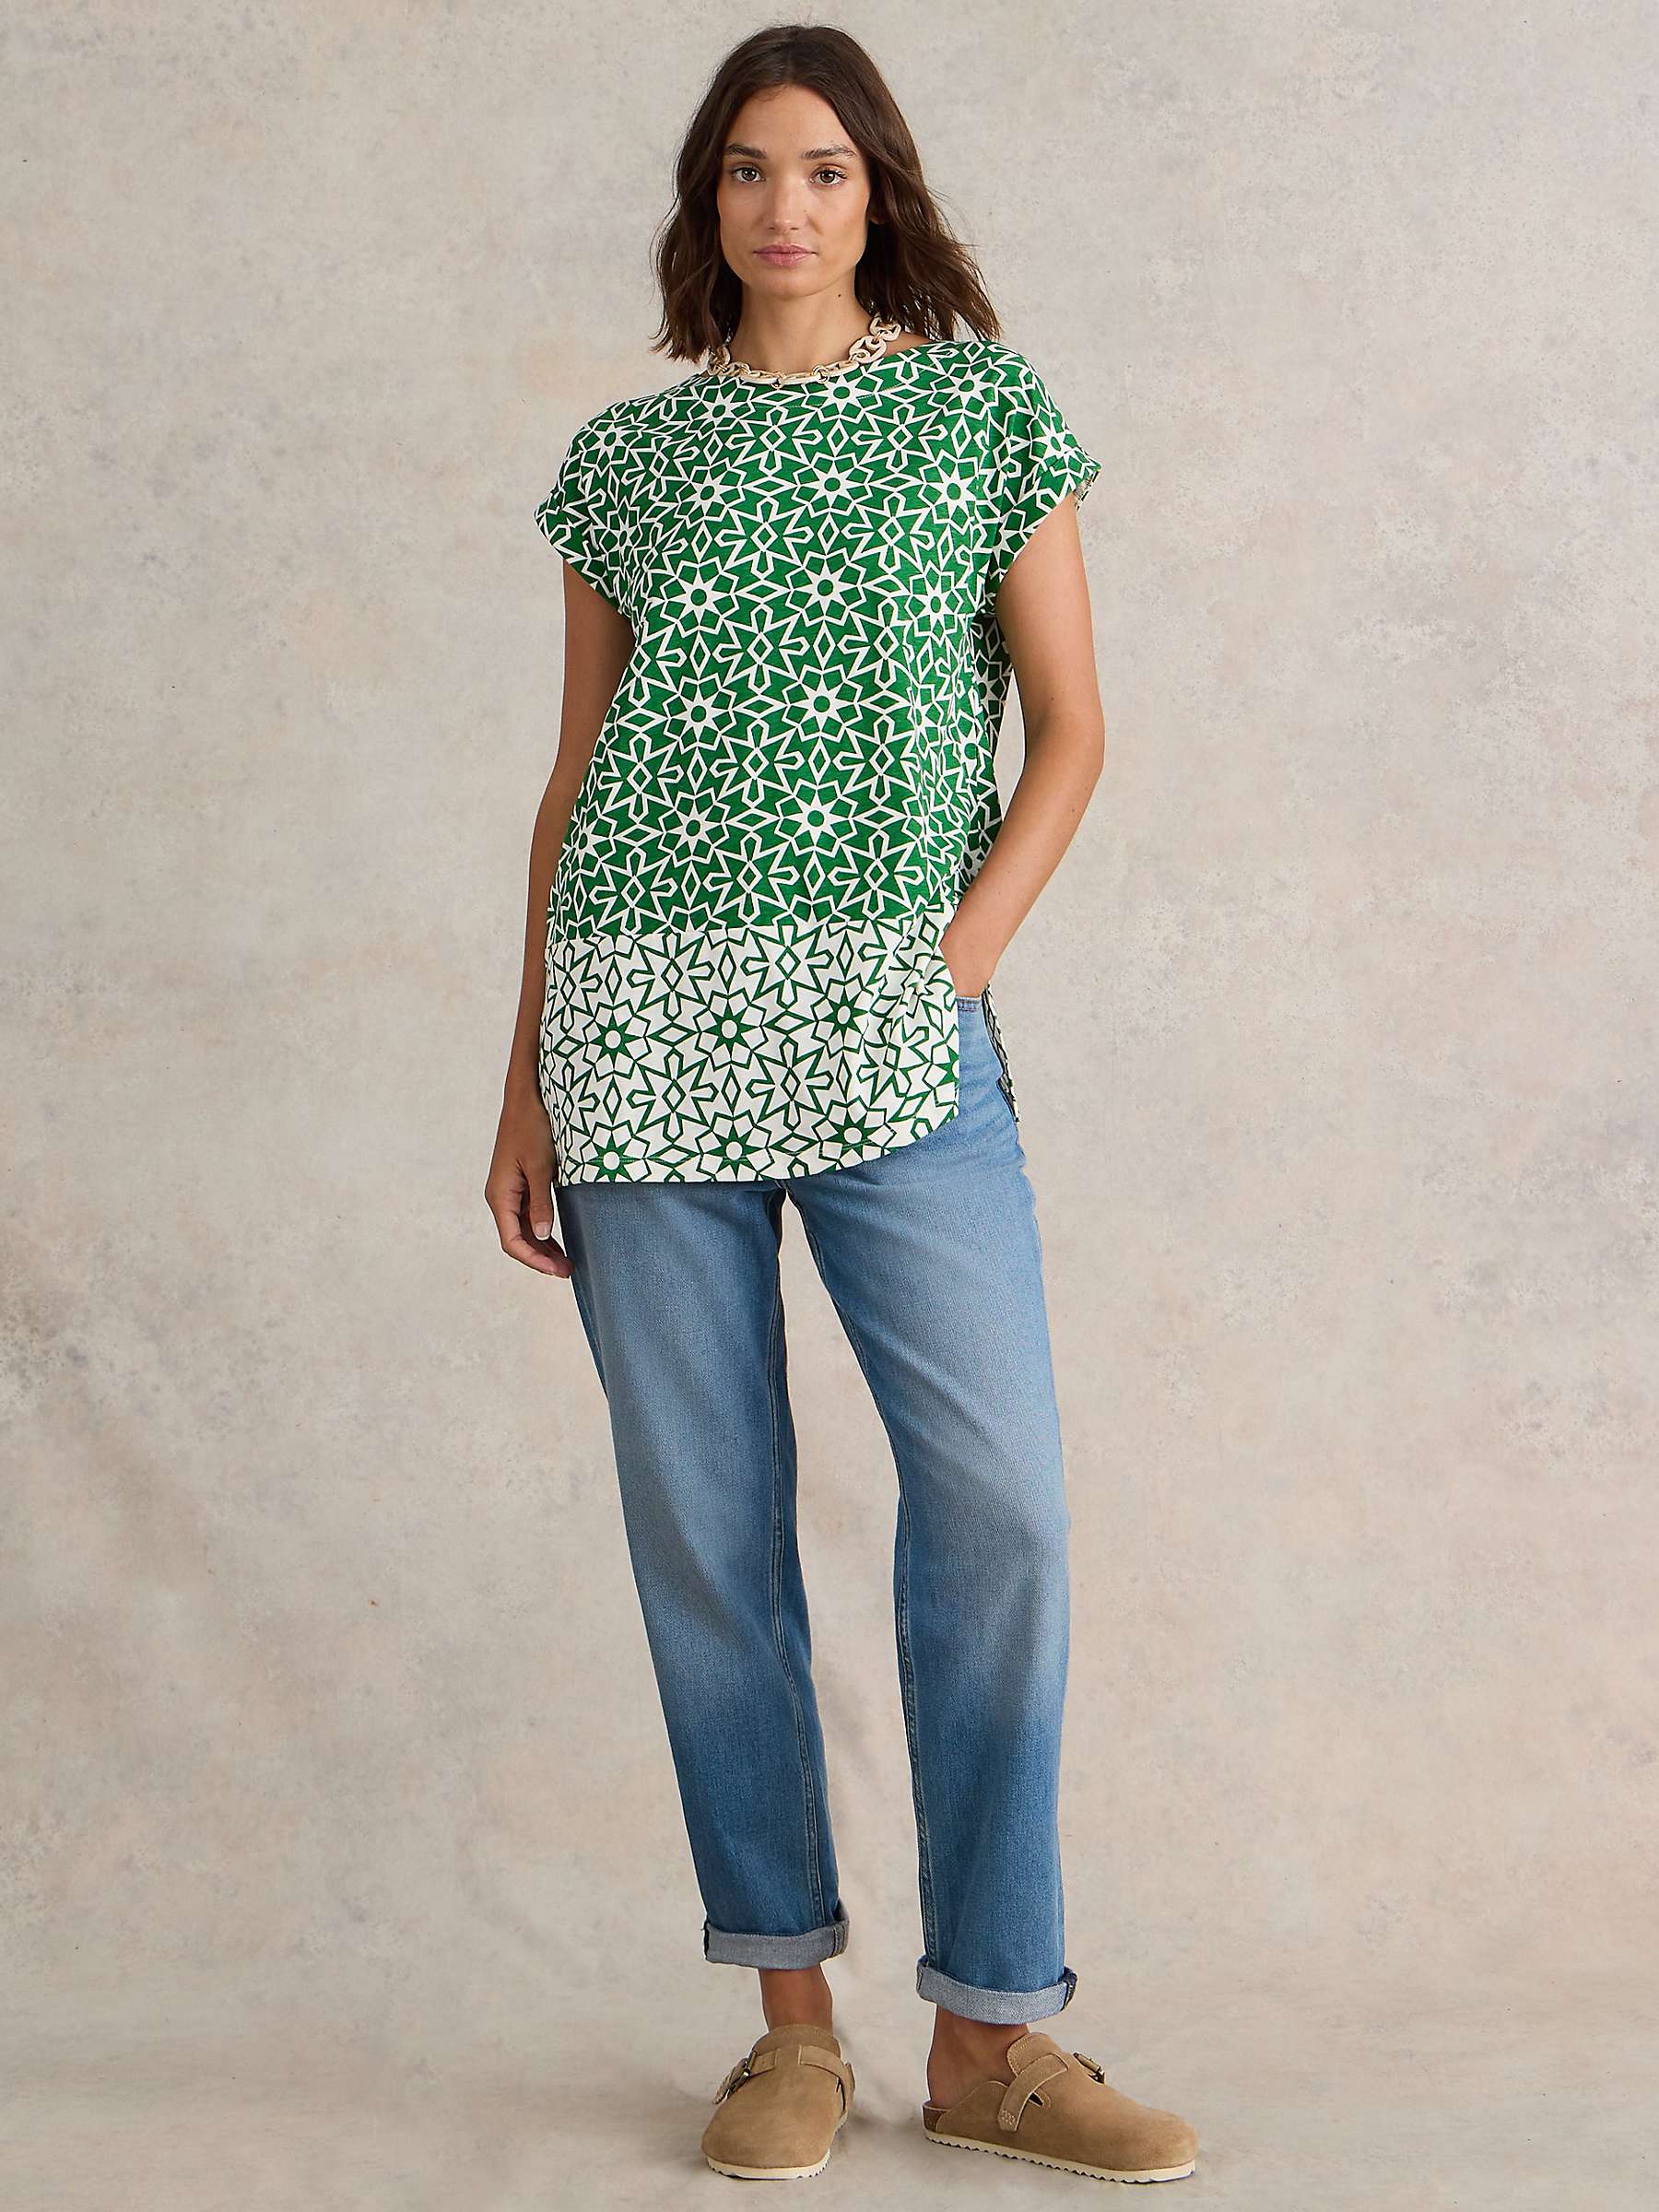 Buy White Stuff Carrie Tunic Top, Green Online at johnlewis.com